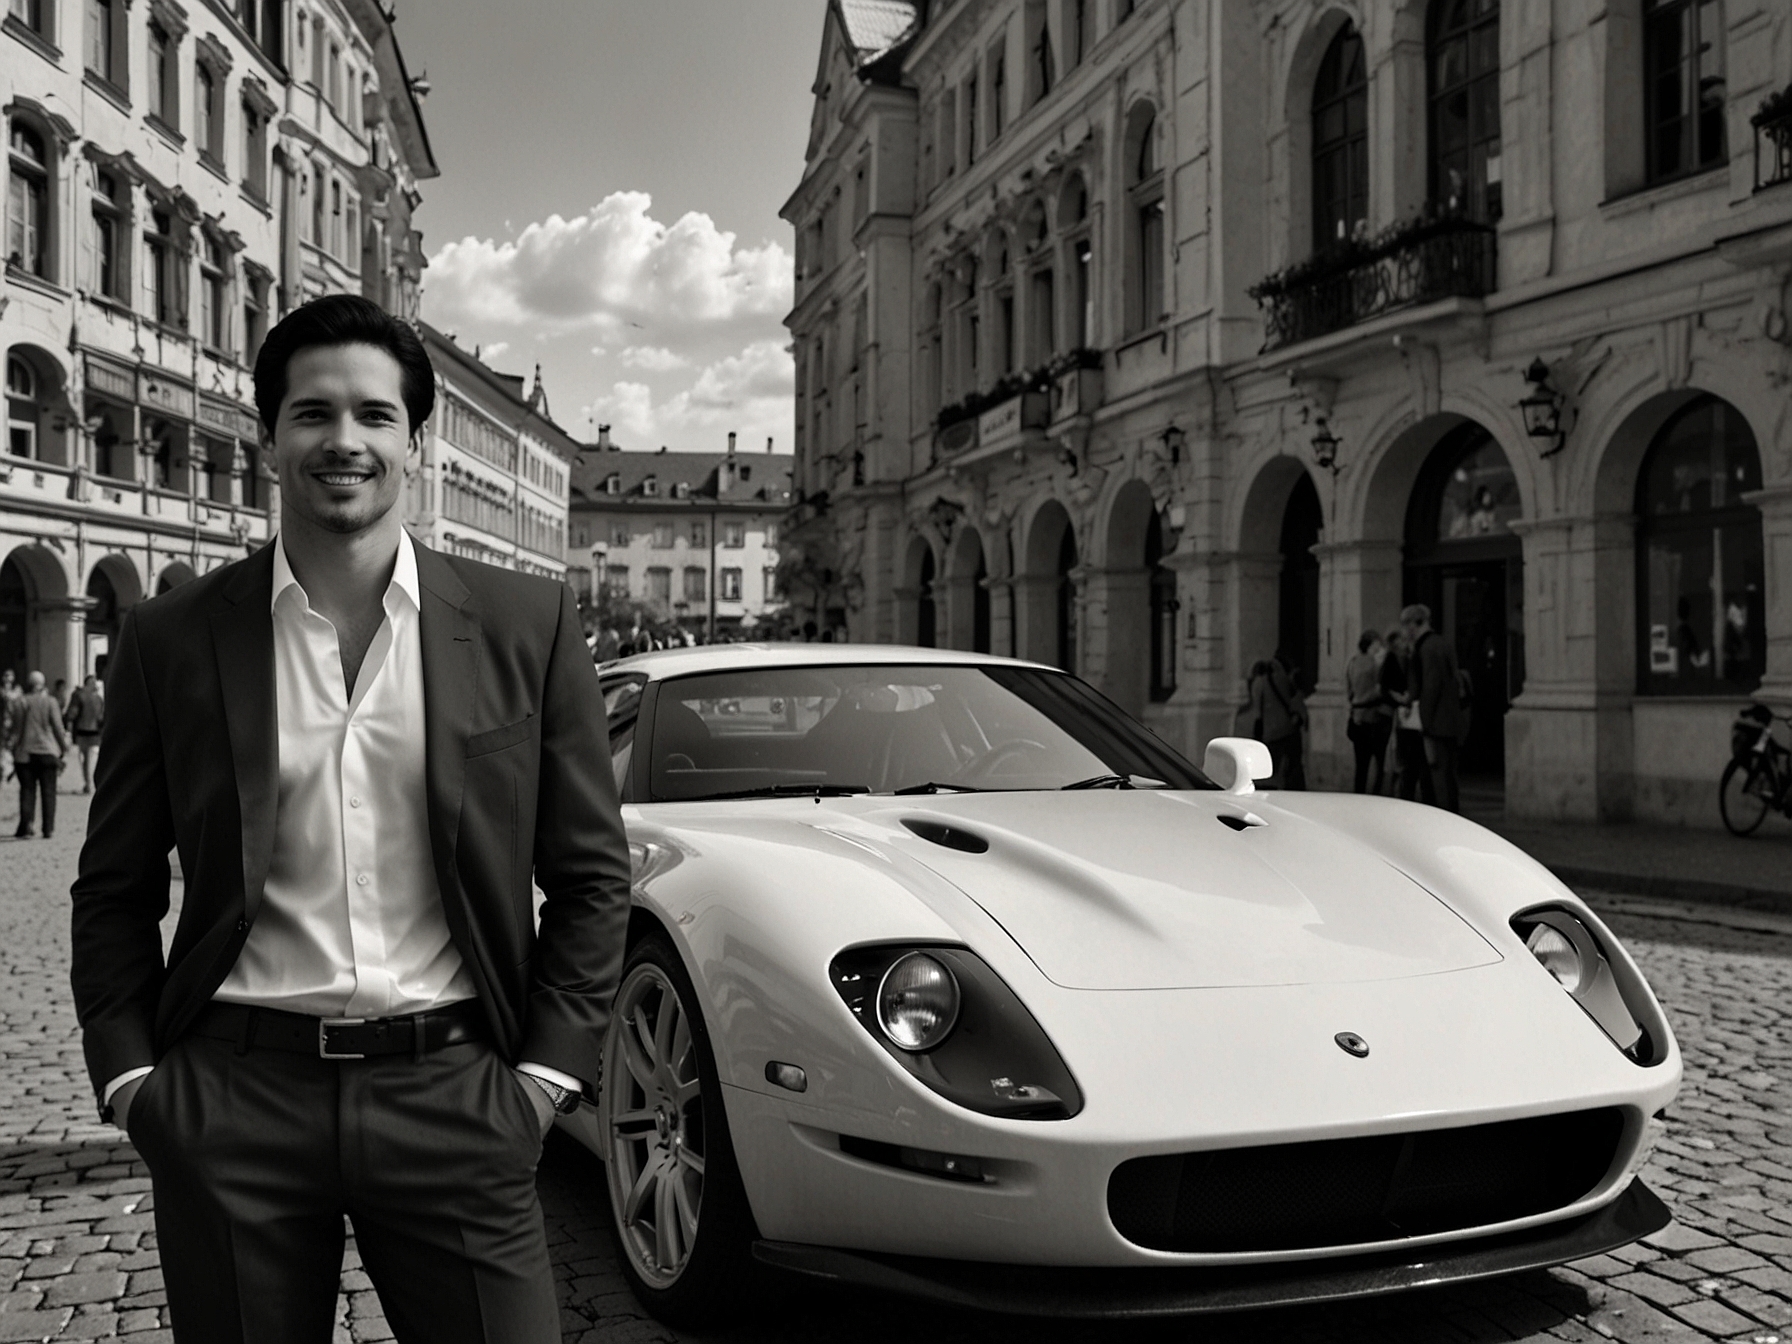 Dino Morea standing next to a high-performance sports car in Munich, with the city's mix of traditional Bavarian architecture and modern buildings in the background.